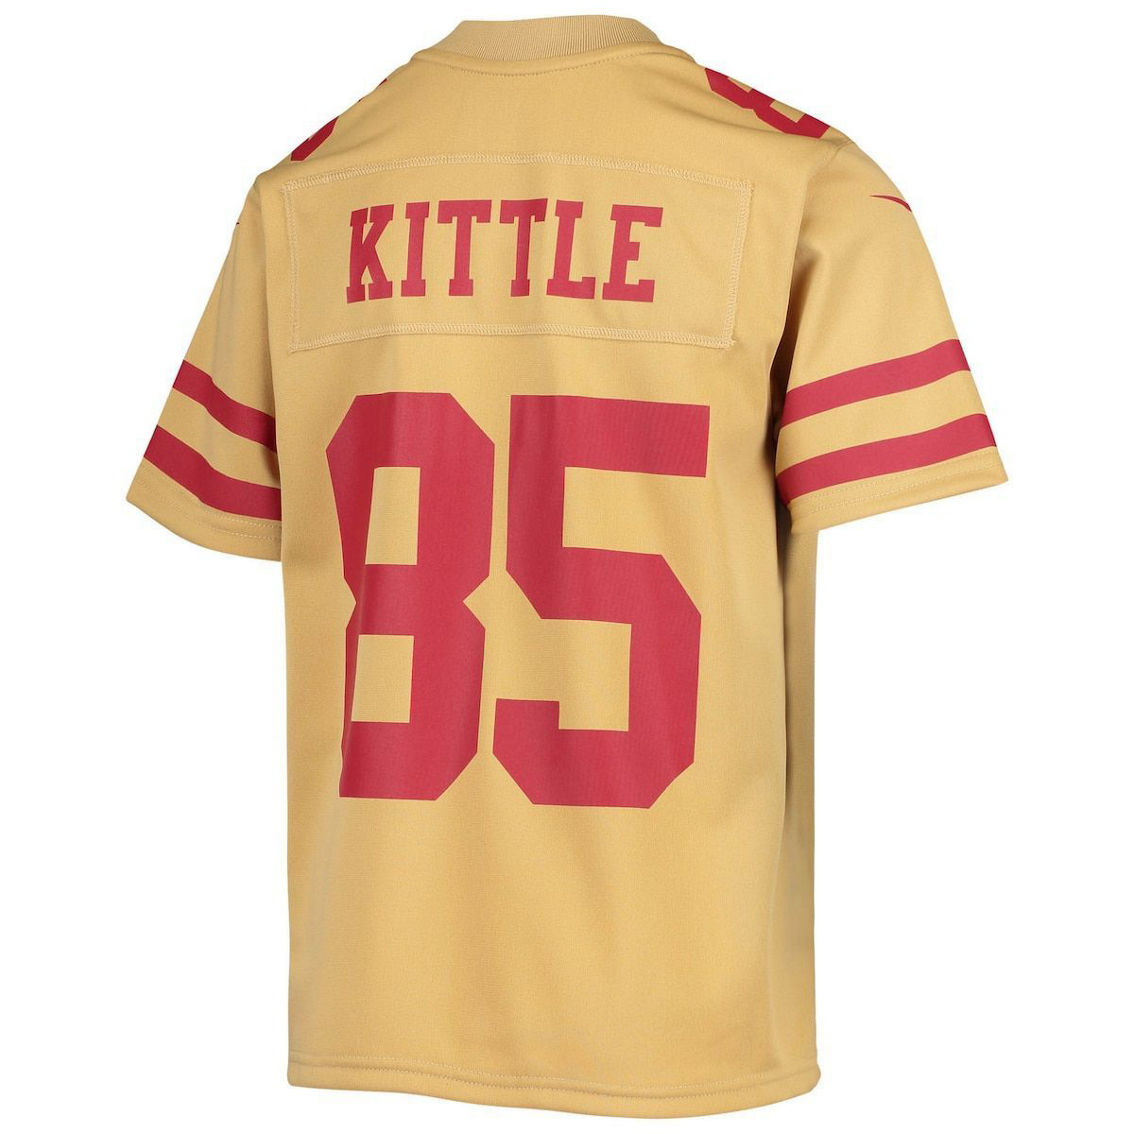 Kittle George youth jersey